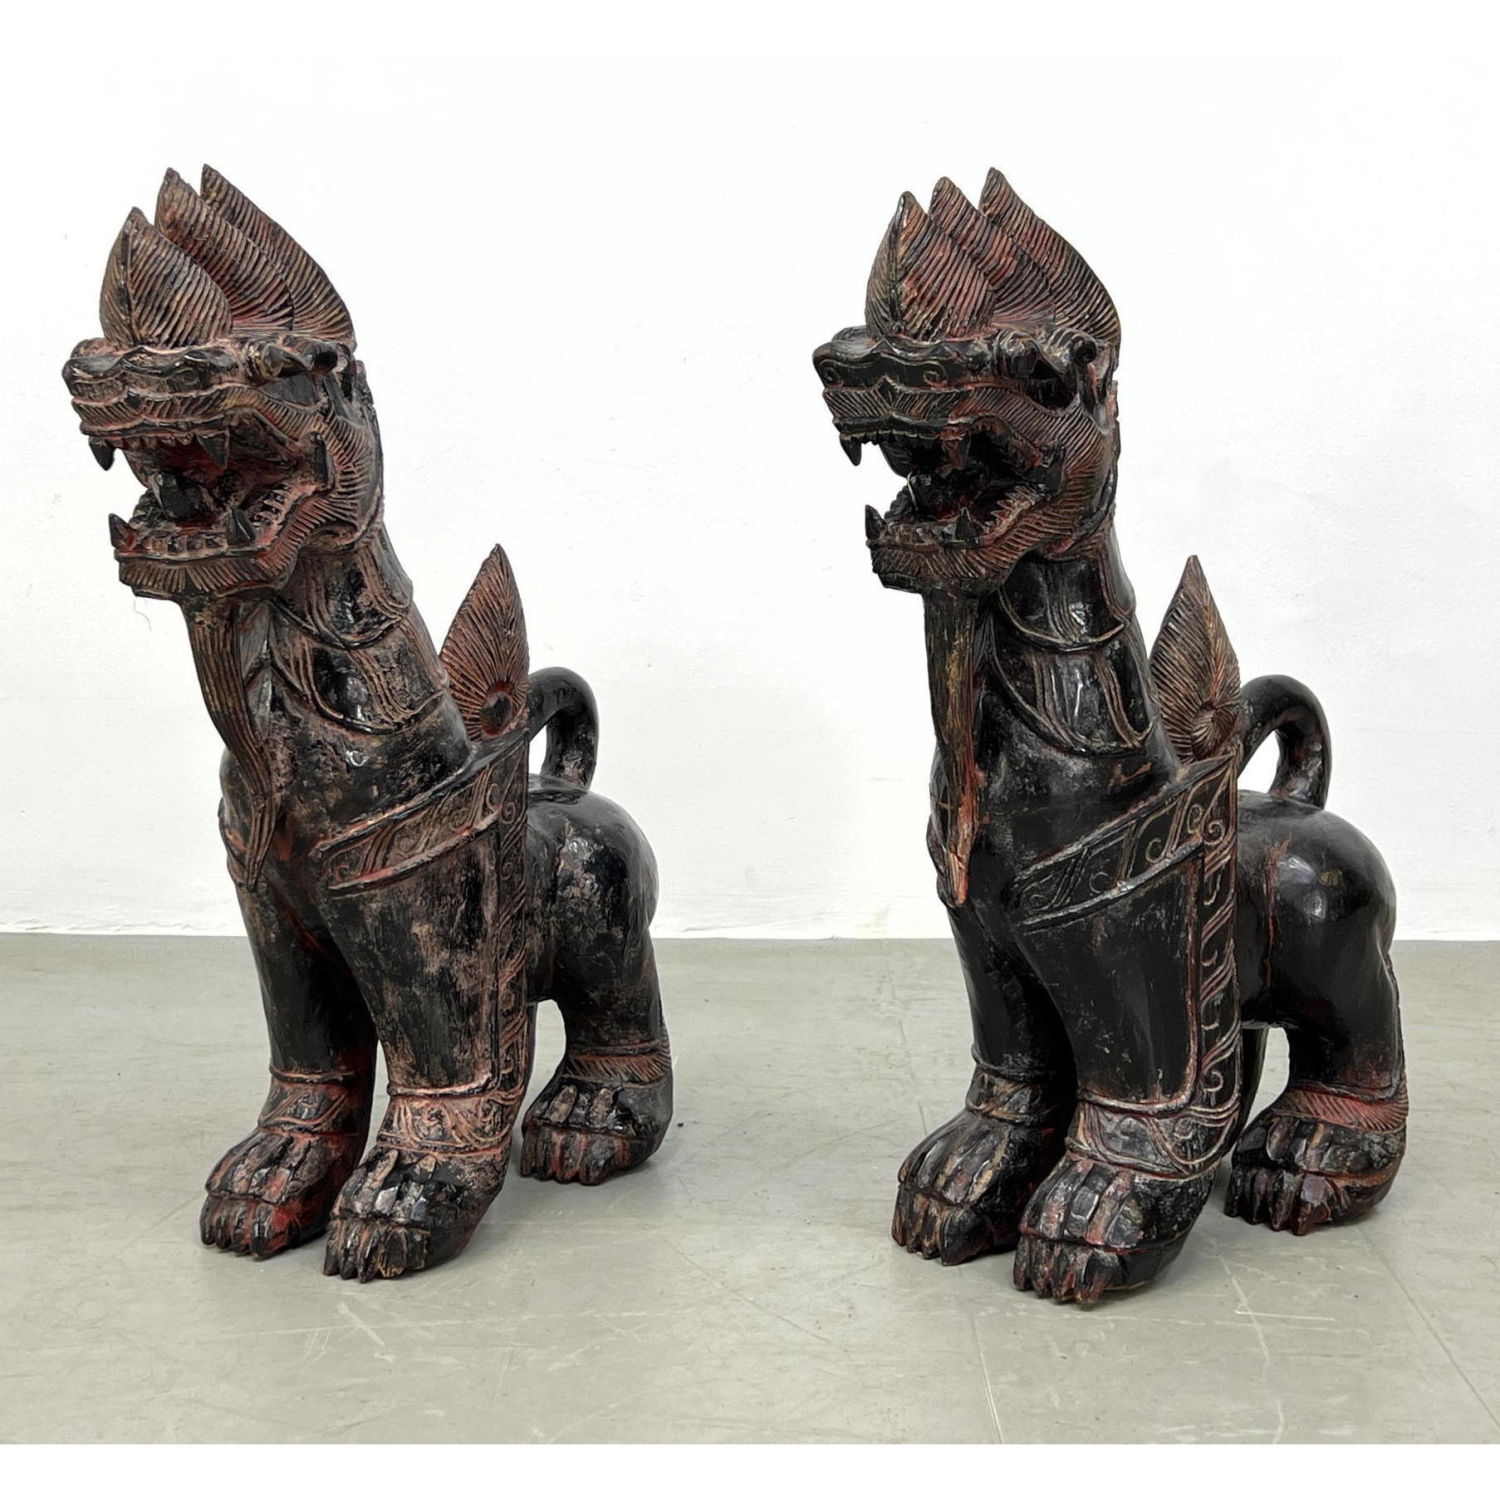 Pr Carved Wood Asian Dragons Guards 2b919d